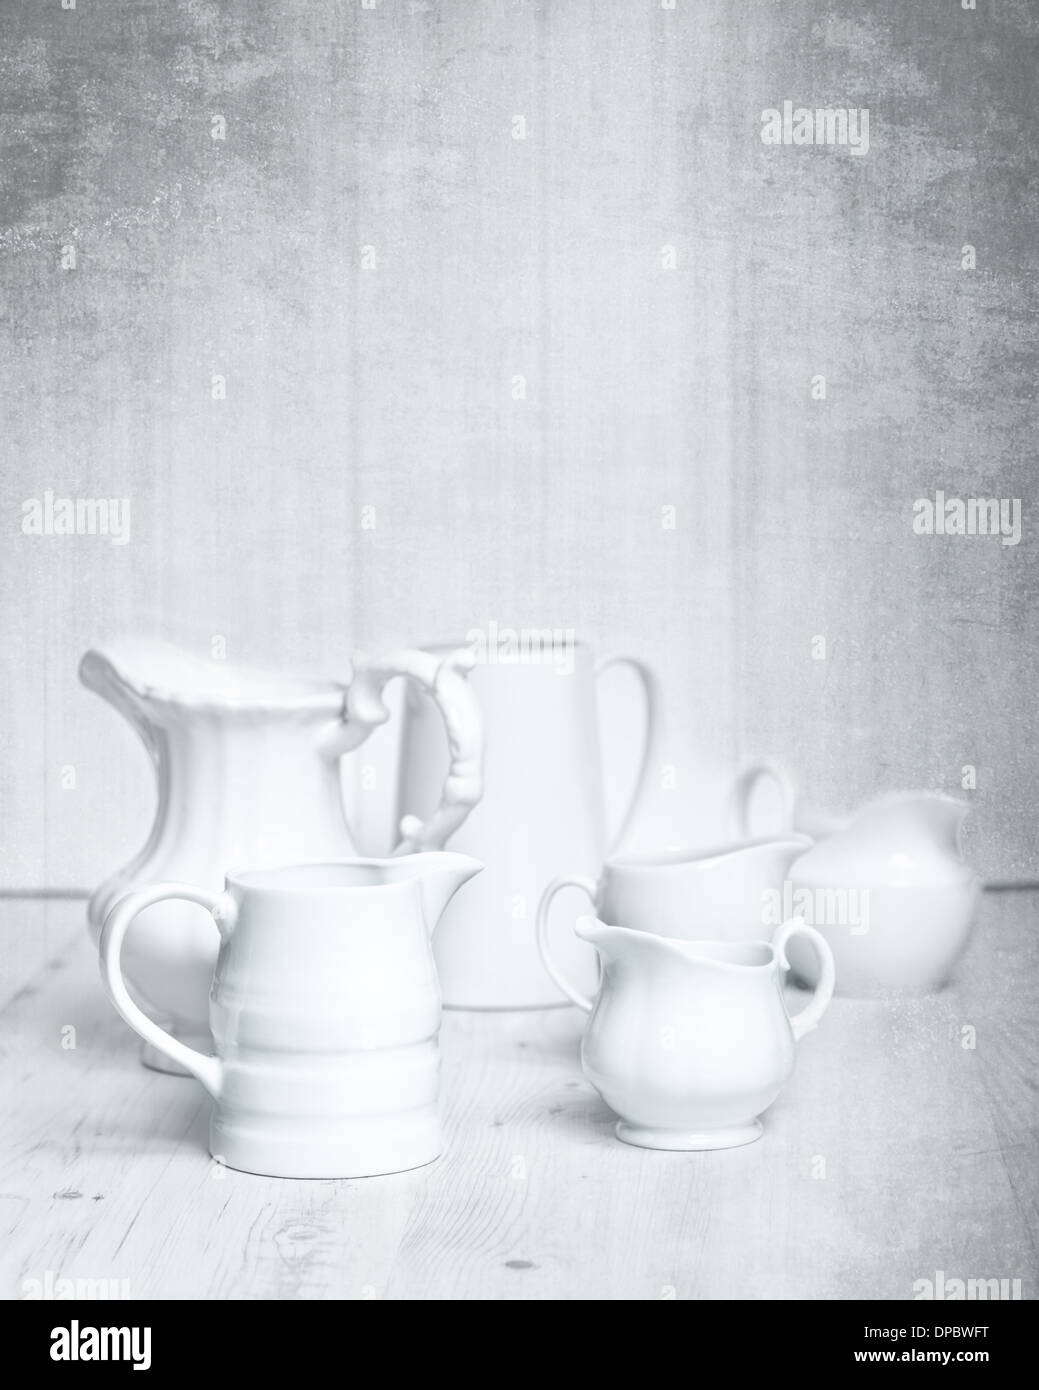 Collection of white jugs on rustic grungy background Stock Photo